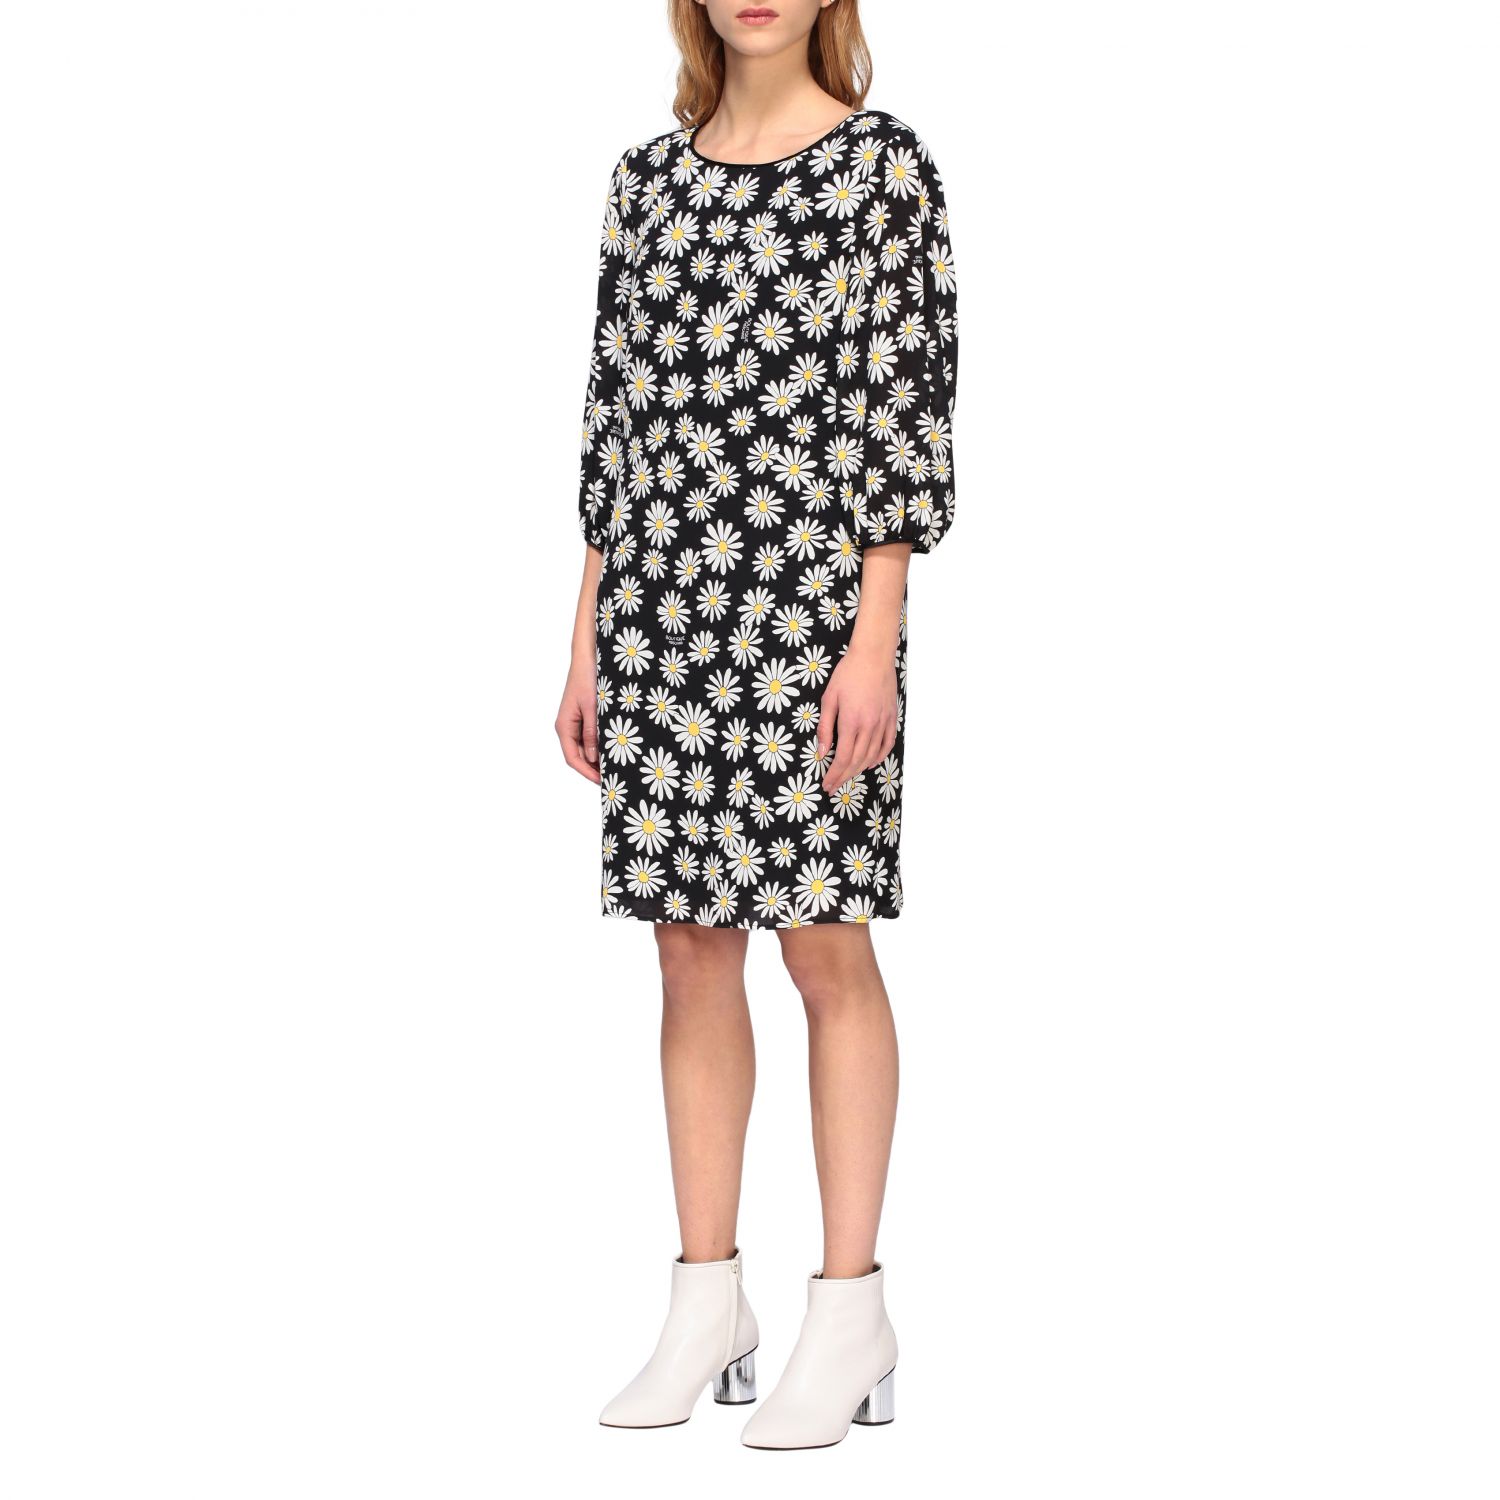 Boutique Moschino Outlet: georgette dress with daisy print - Black ...